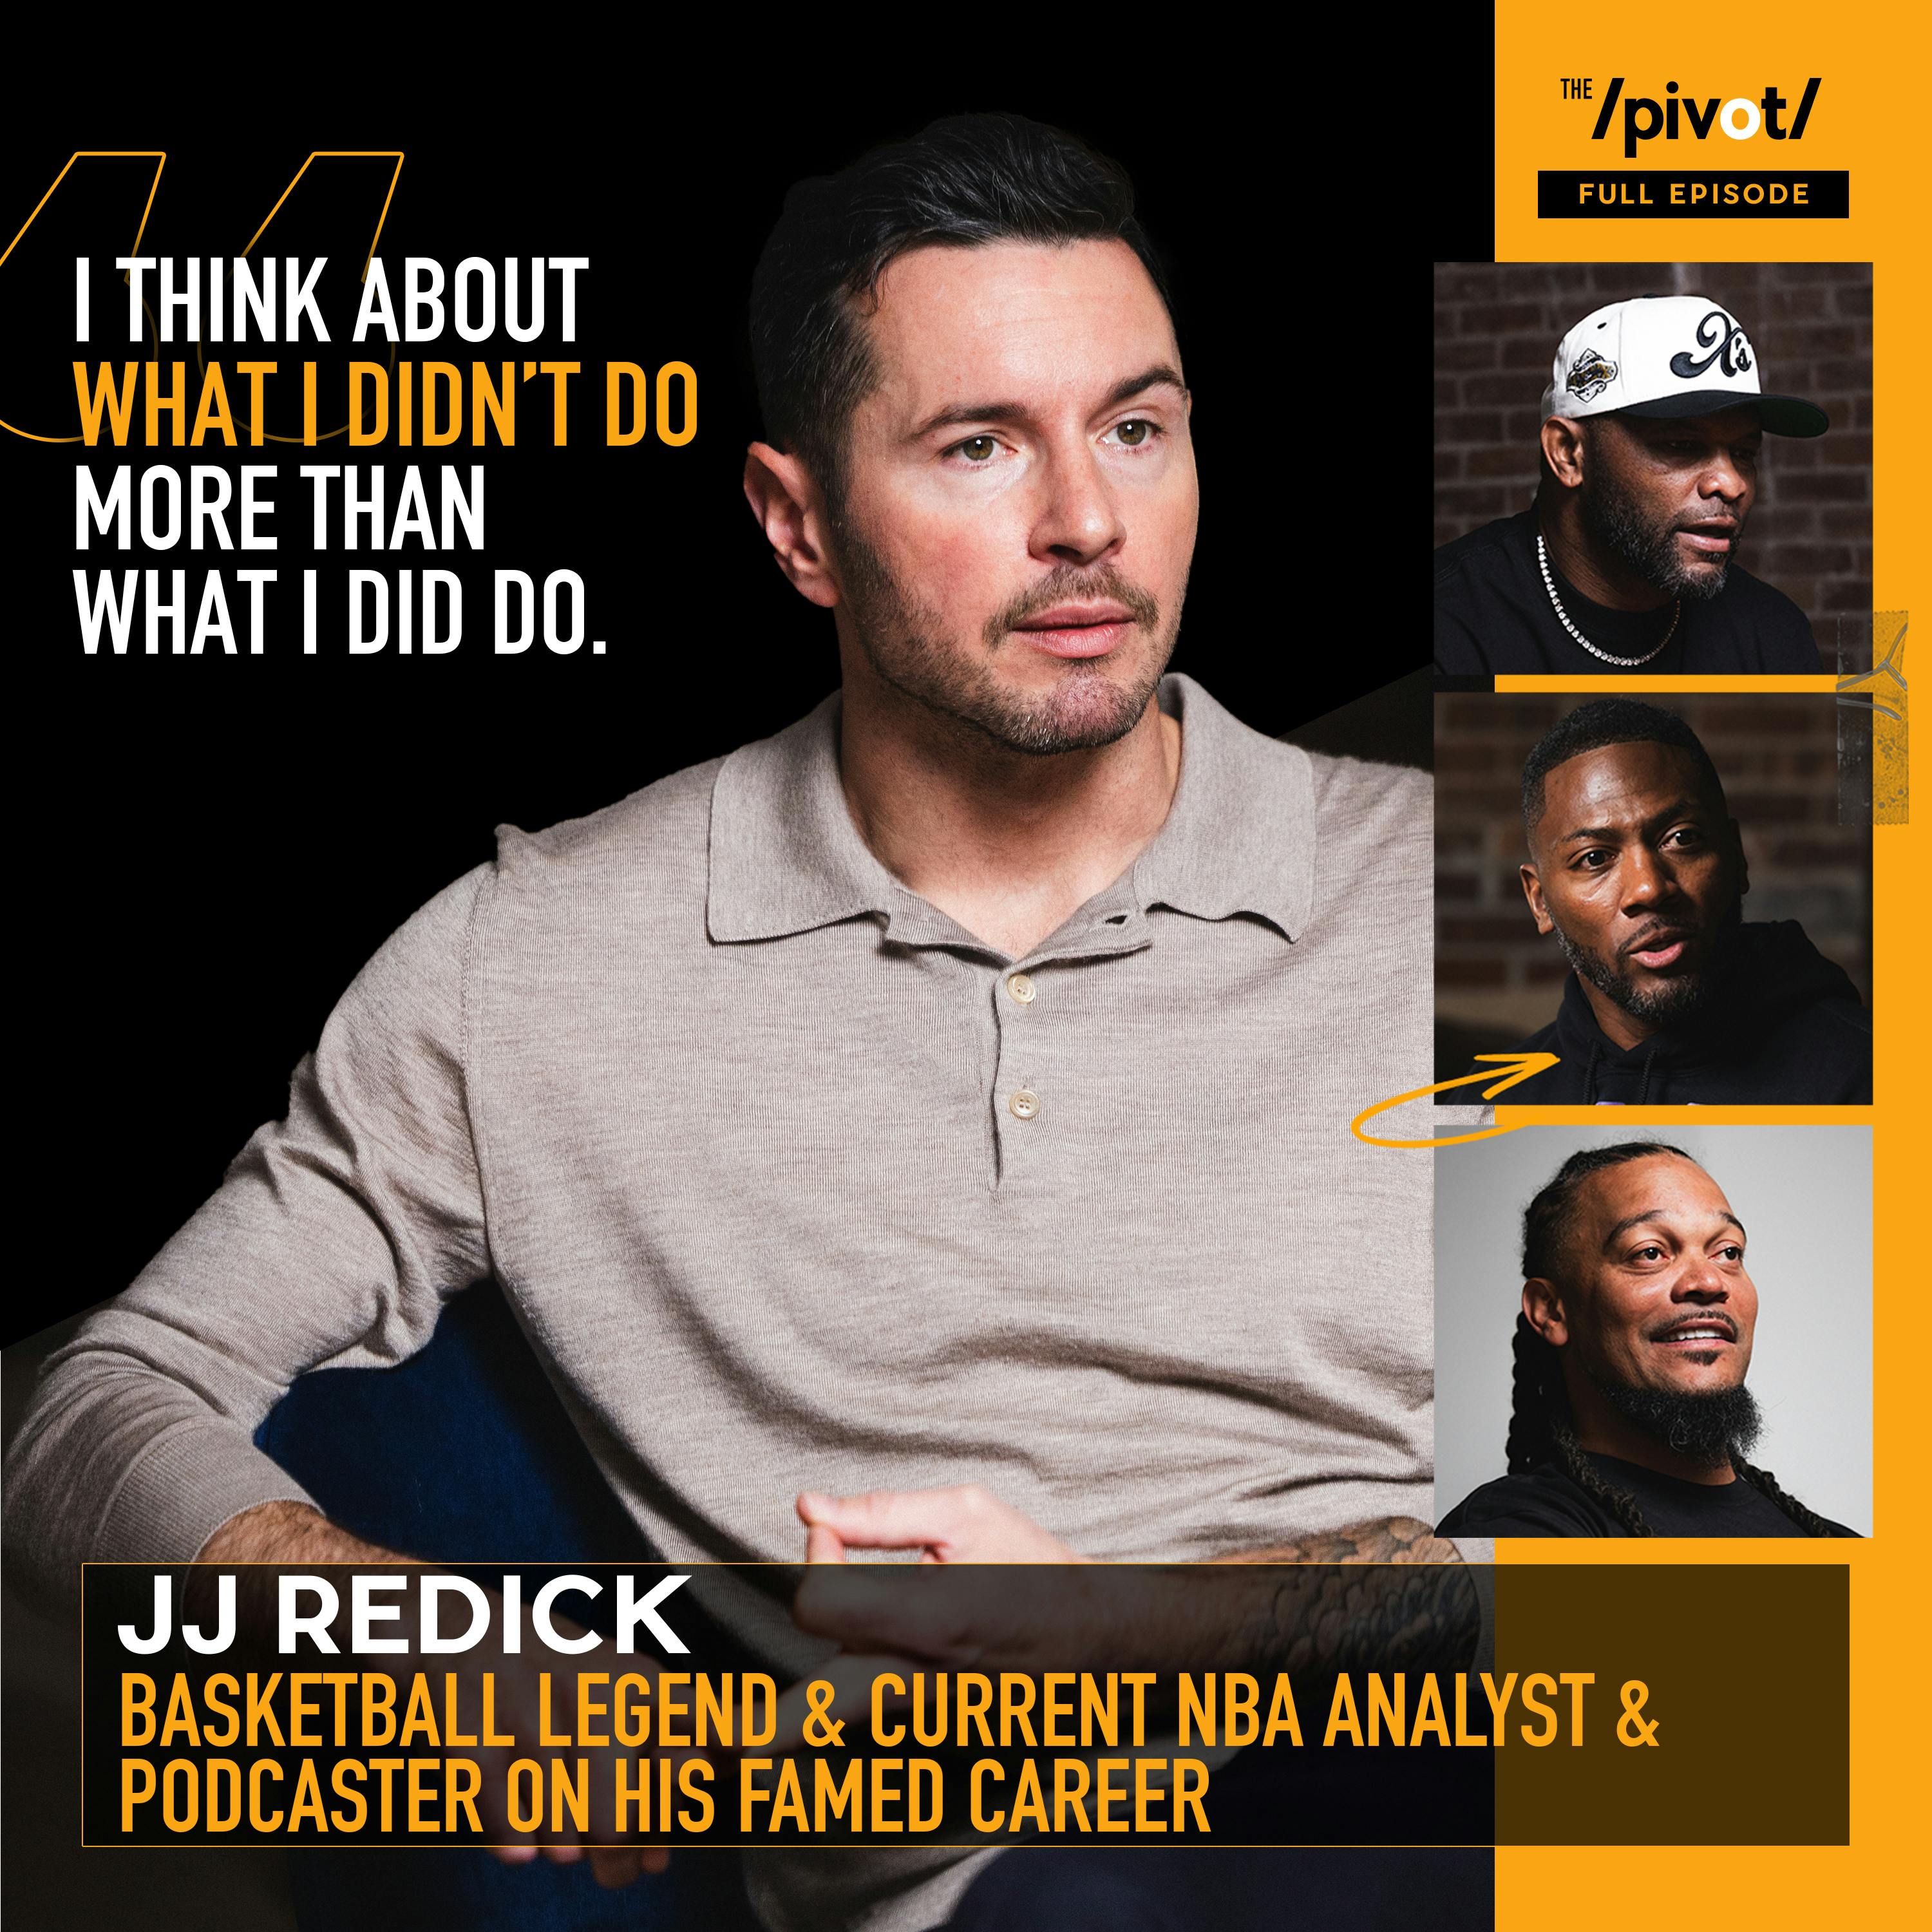 JJ Redick: Duke Legend, former NBA star turned TV analyst and podcaster, shares his storied journey of basketball, perseverance and rapid rise in media, recently teaming up with Lebron & answers if be